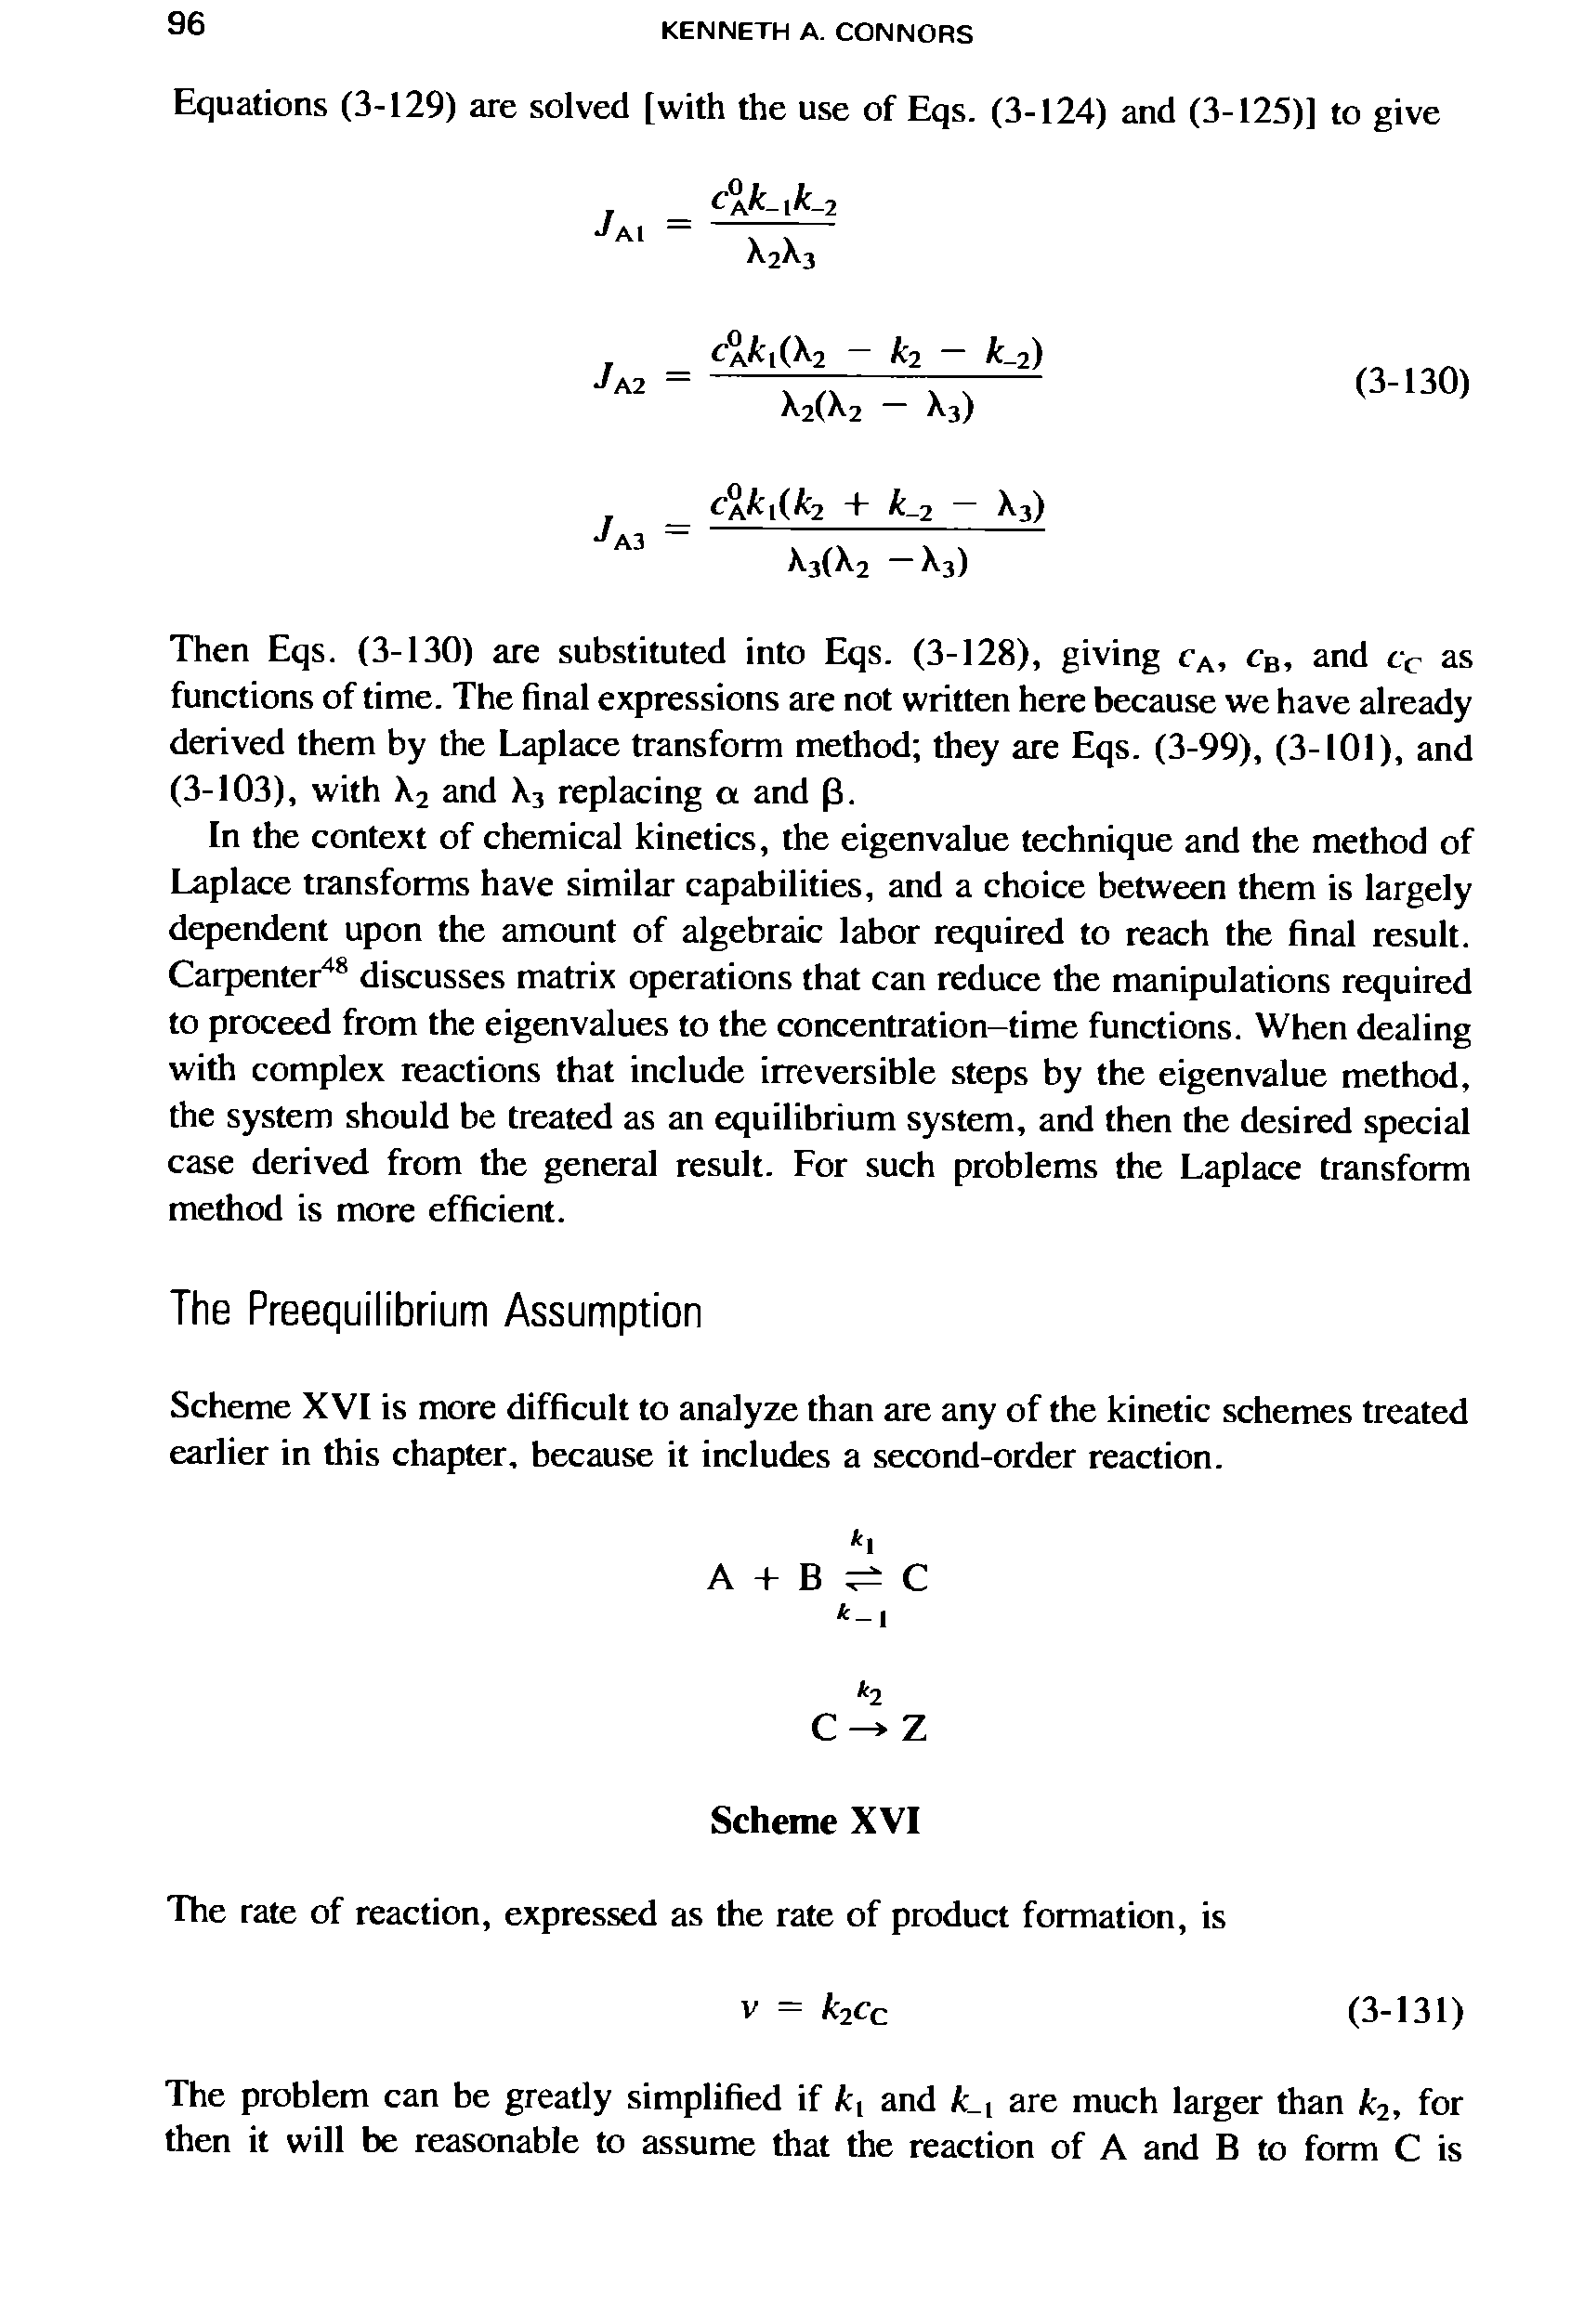 Scheme XVI is more difficult to analyze than are any of the kinetic schemes treated earlier in this chapter, because it includes a second-order reaction.